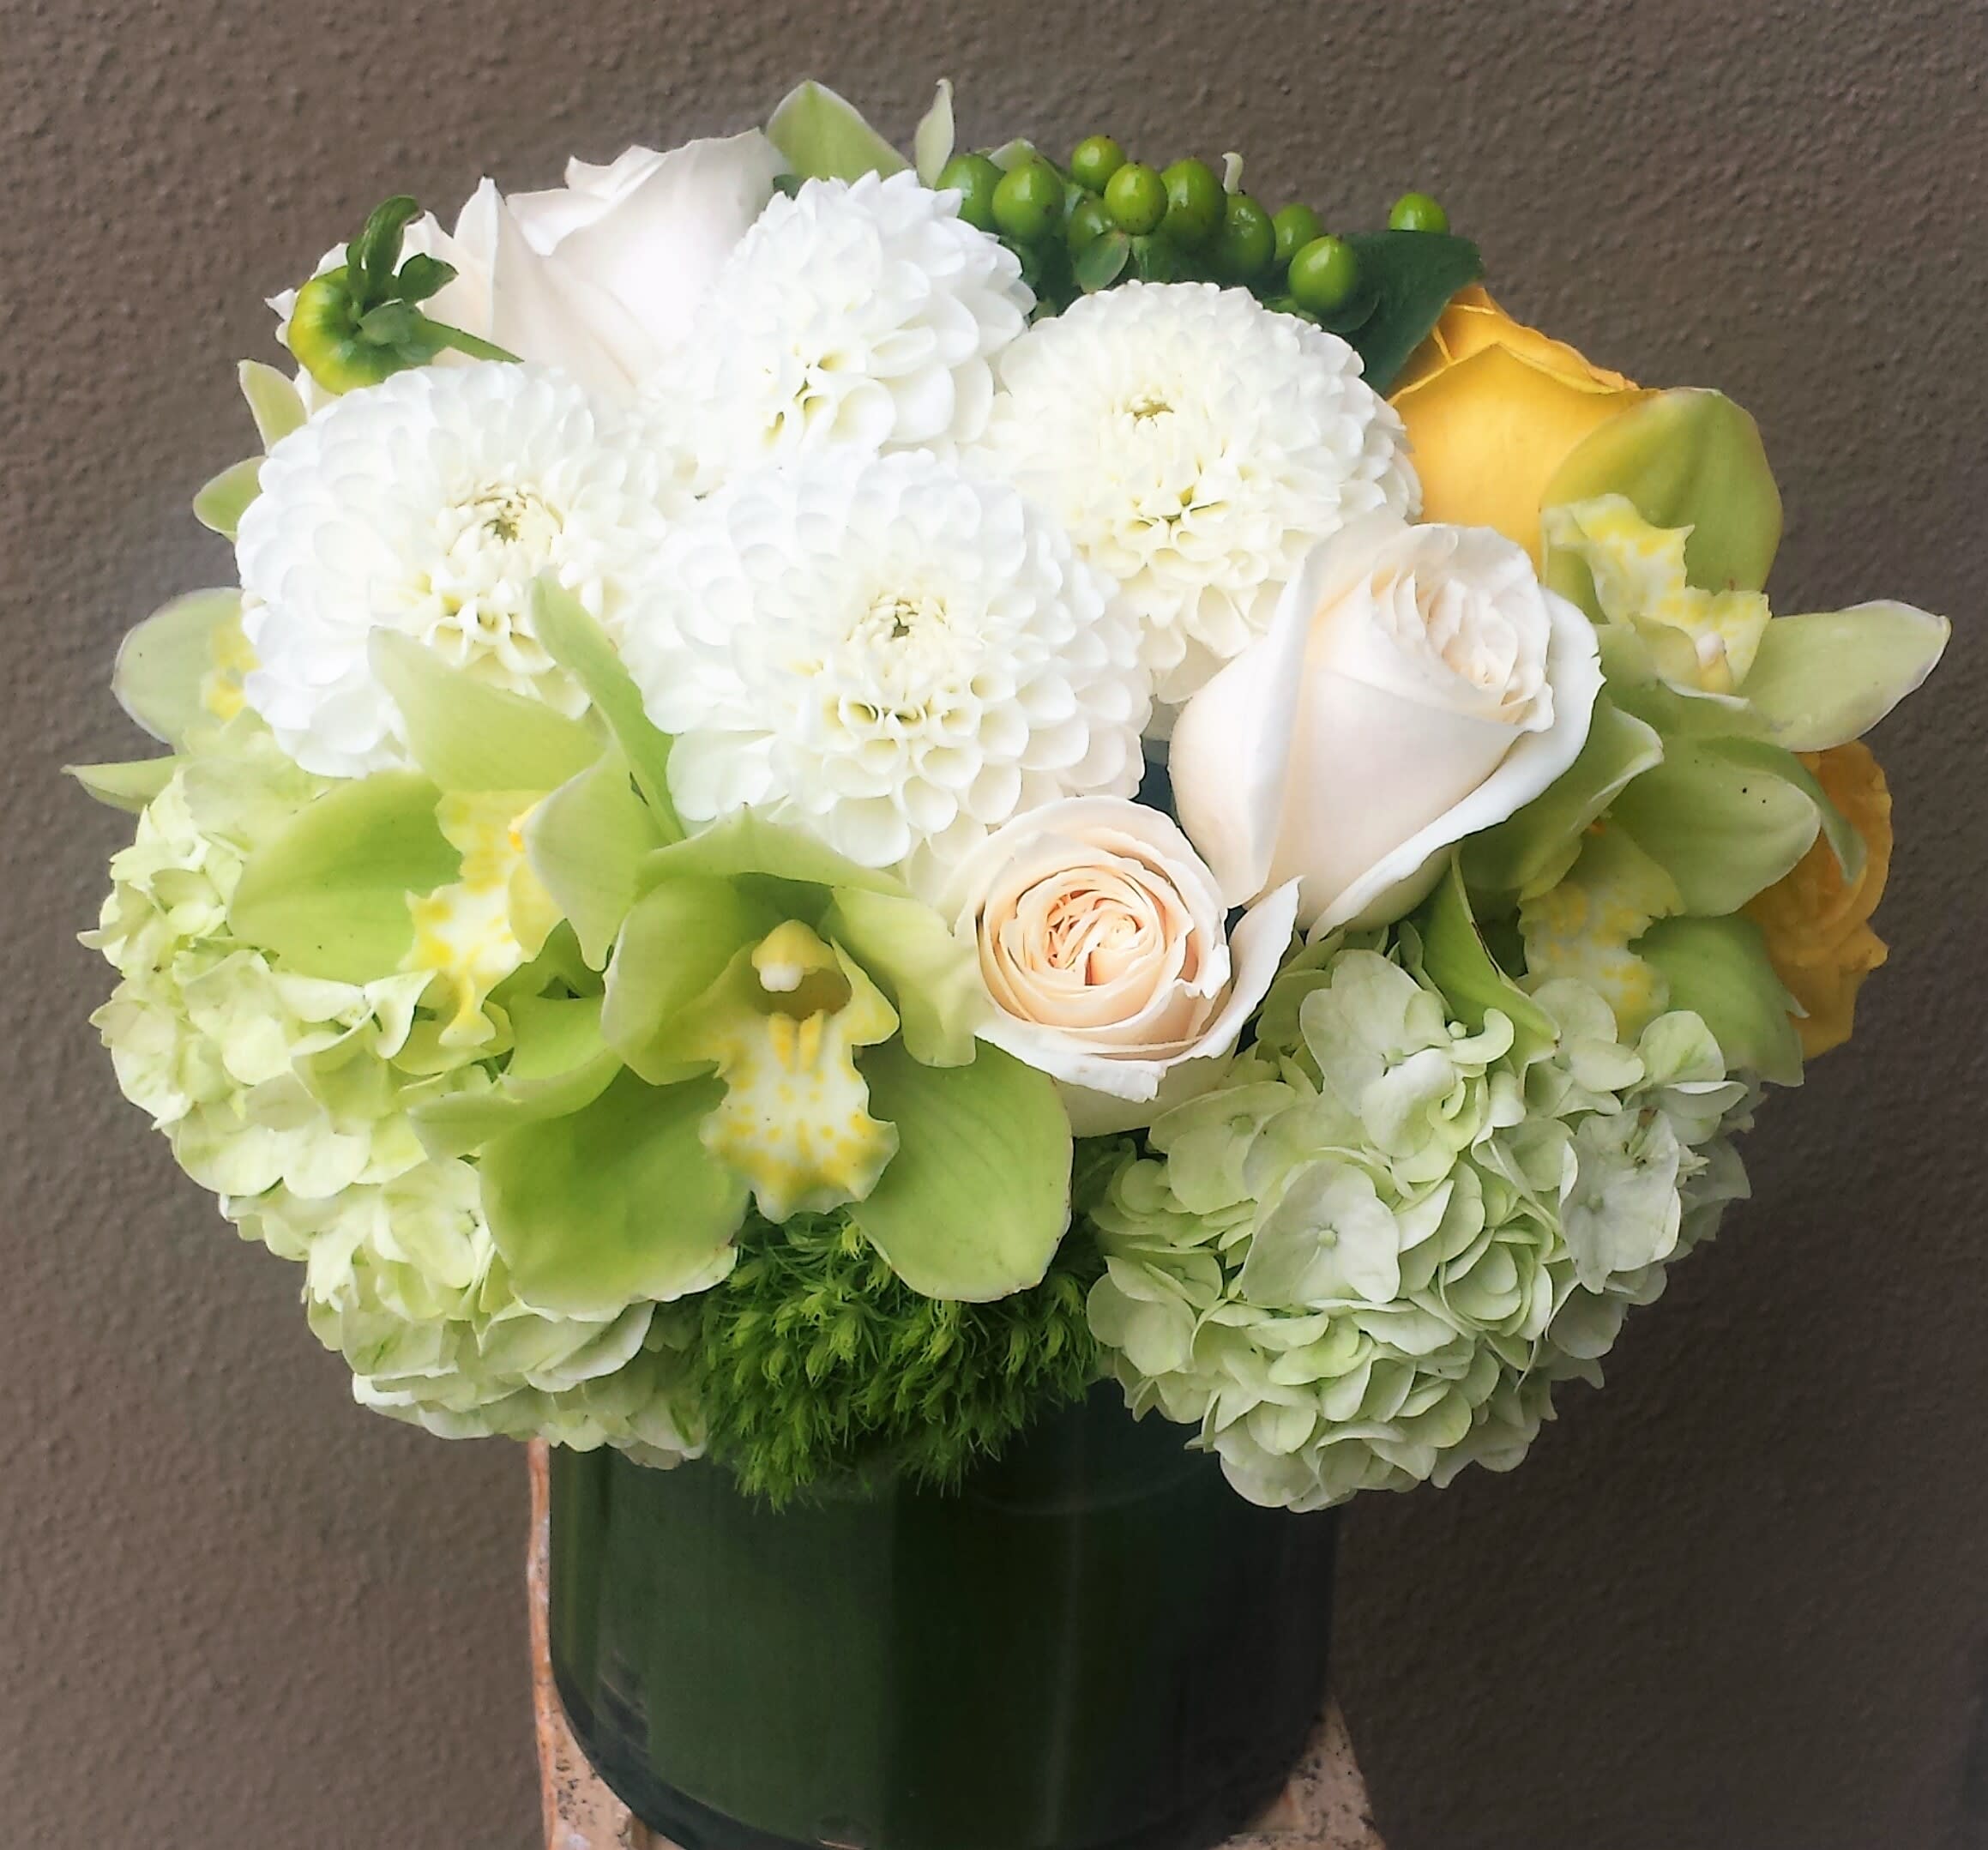 Lemonade - Clean and elegant low square arrangement in green, white and a touch of yellow blooms.